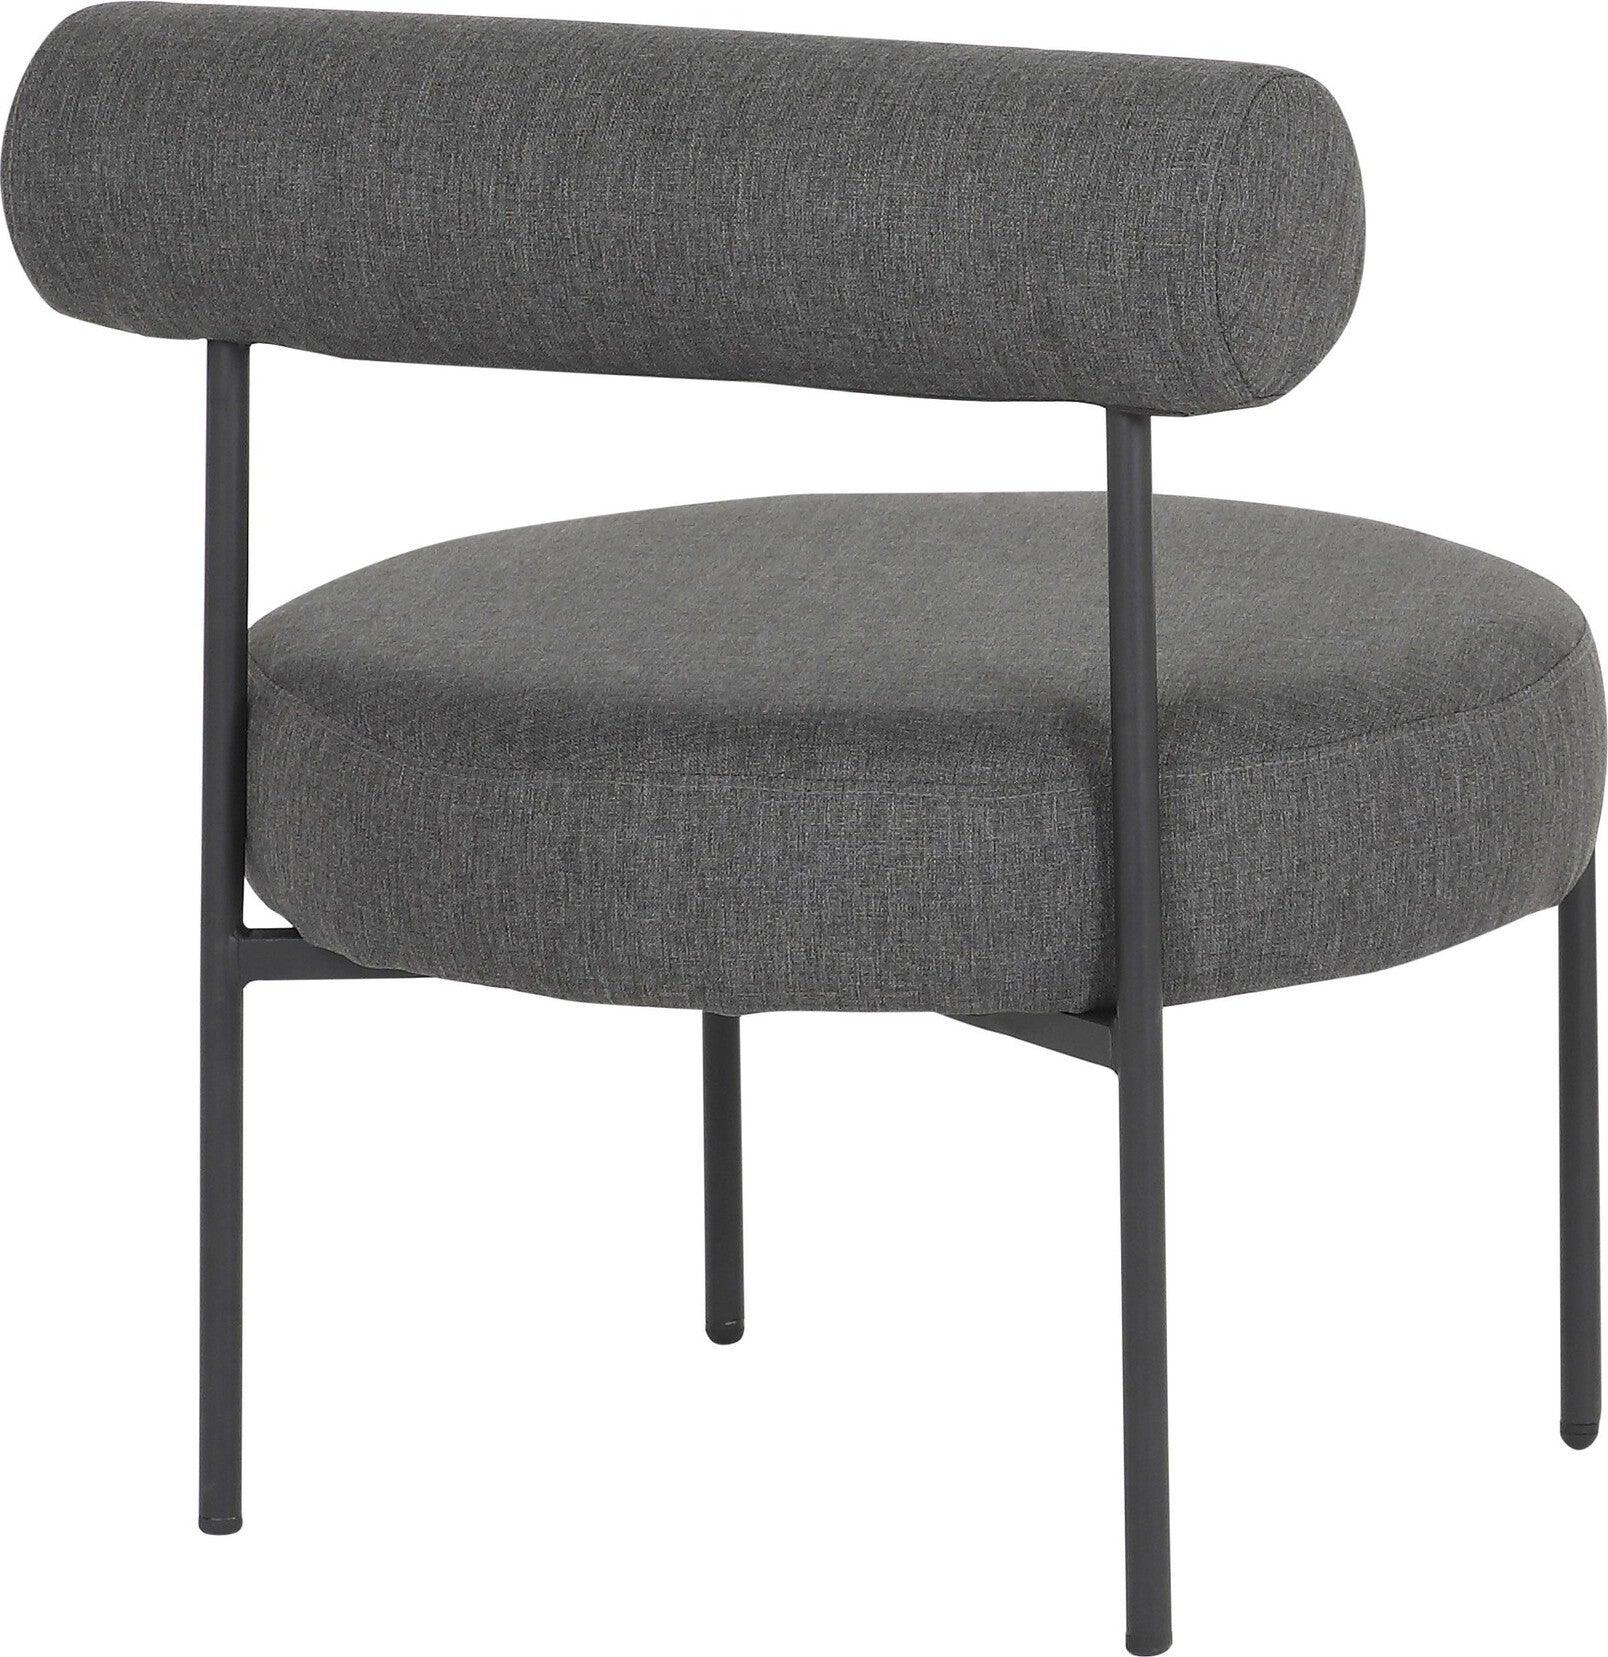 Lumisource Accent Chairs - Rhonda Accent Chair Black & Charcoal